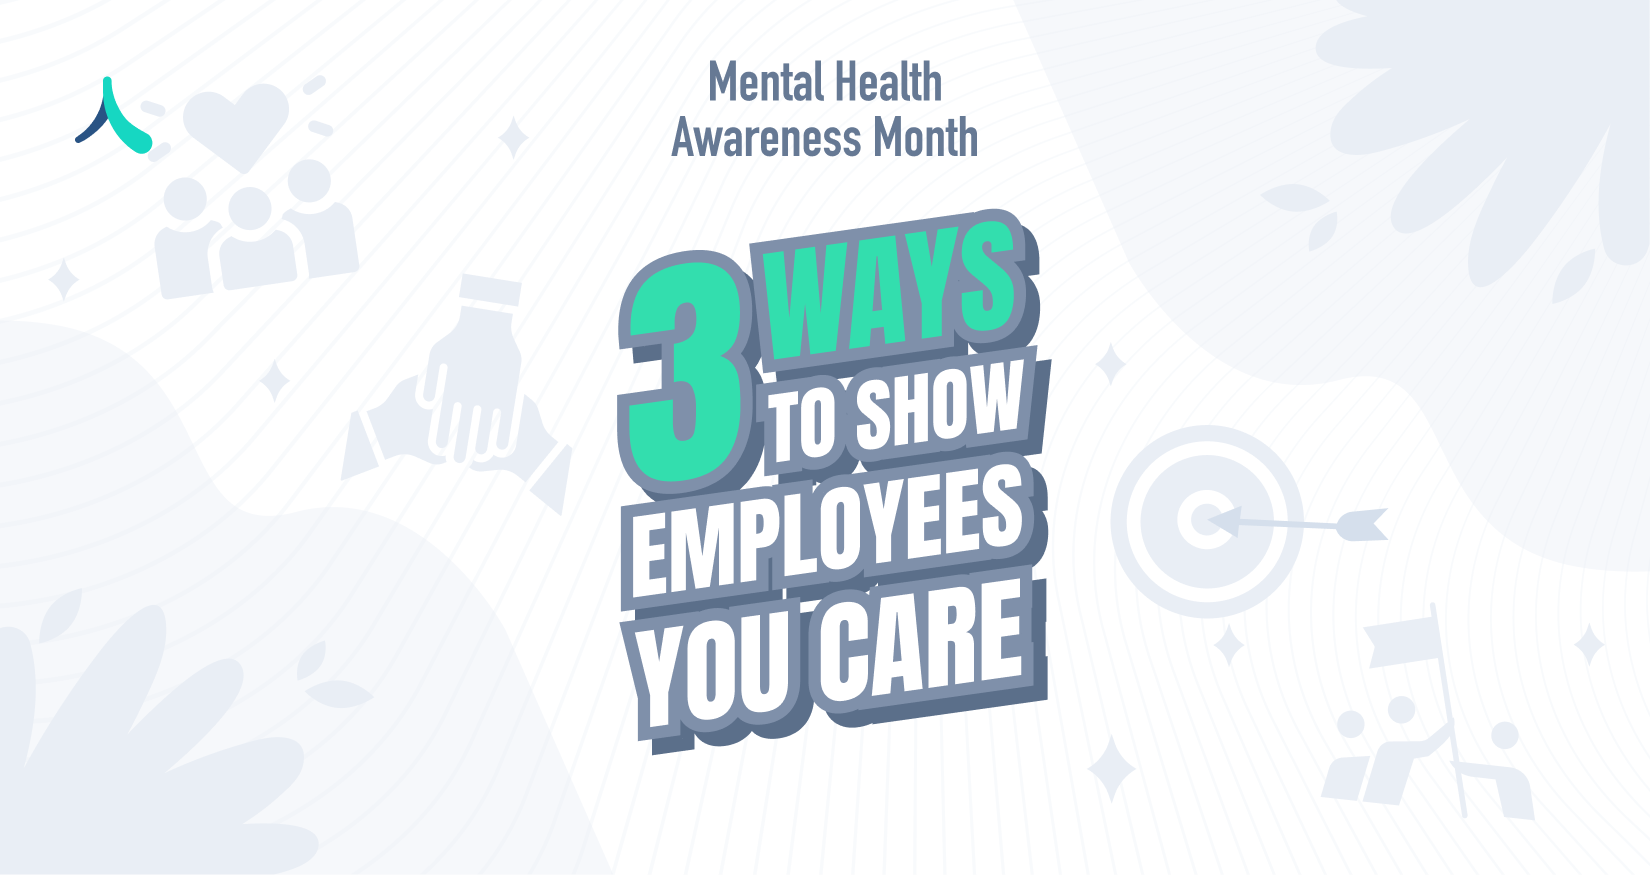 Mental Health Awareness Month: 3 Ways to Show Employees You Care